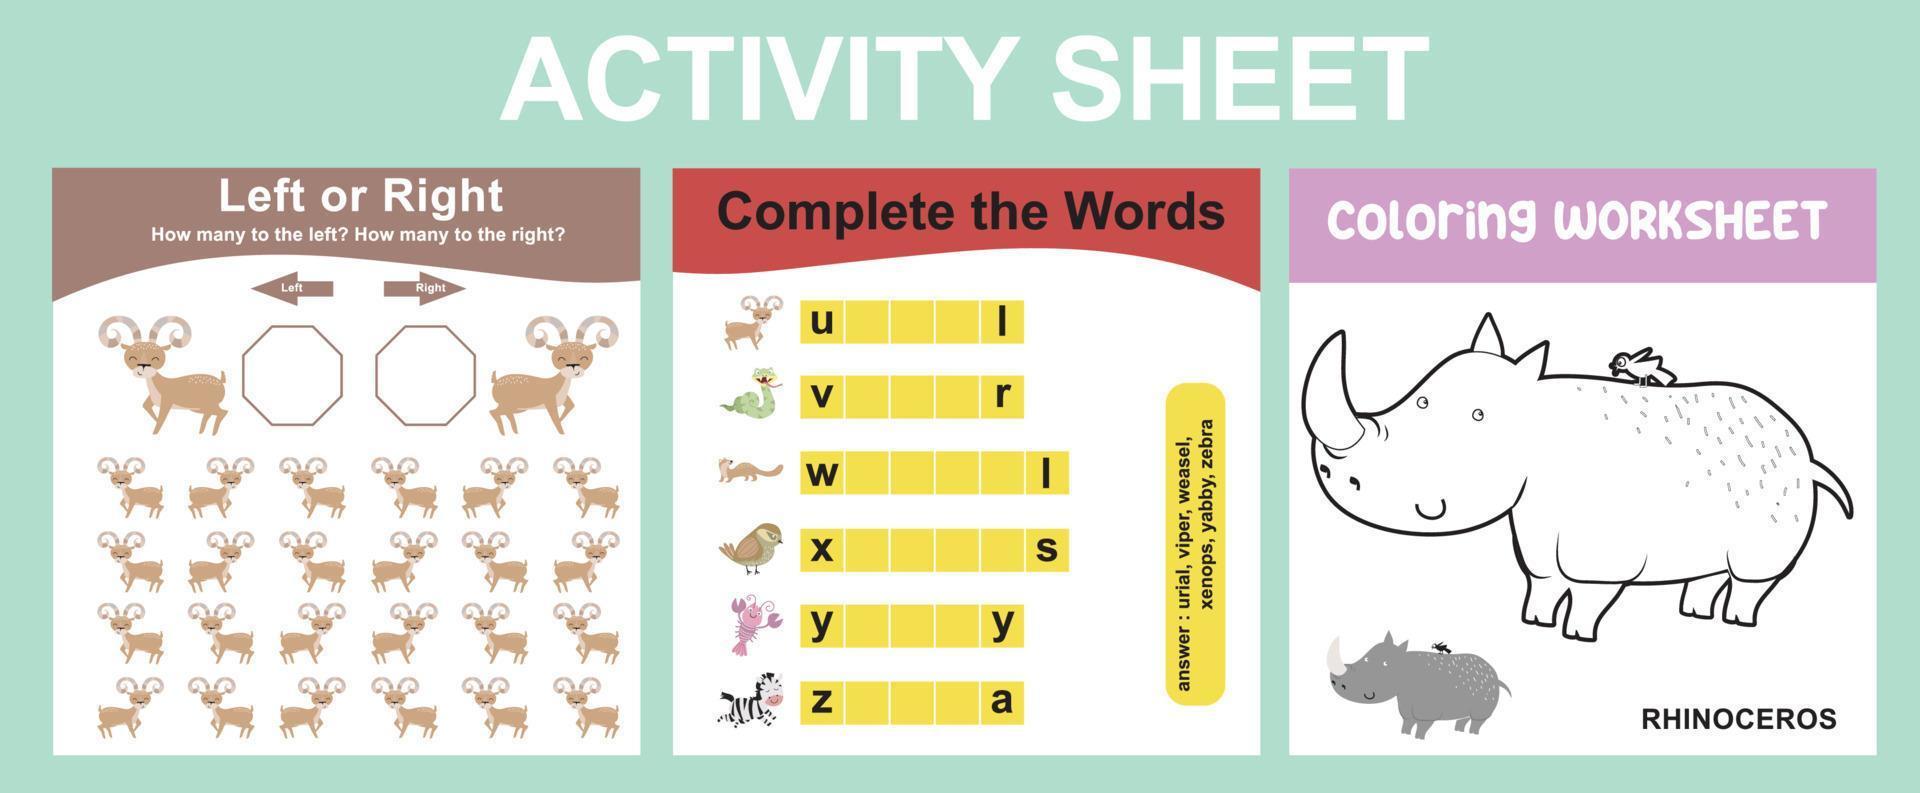 Educational printable worksheet. Activity sheet for children with animal theme. Coloring sheet, counting left or right animals, complete the words activity. Vector file.